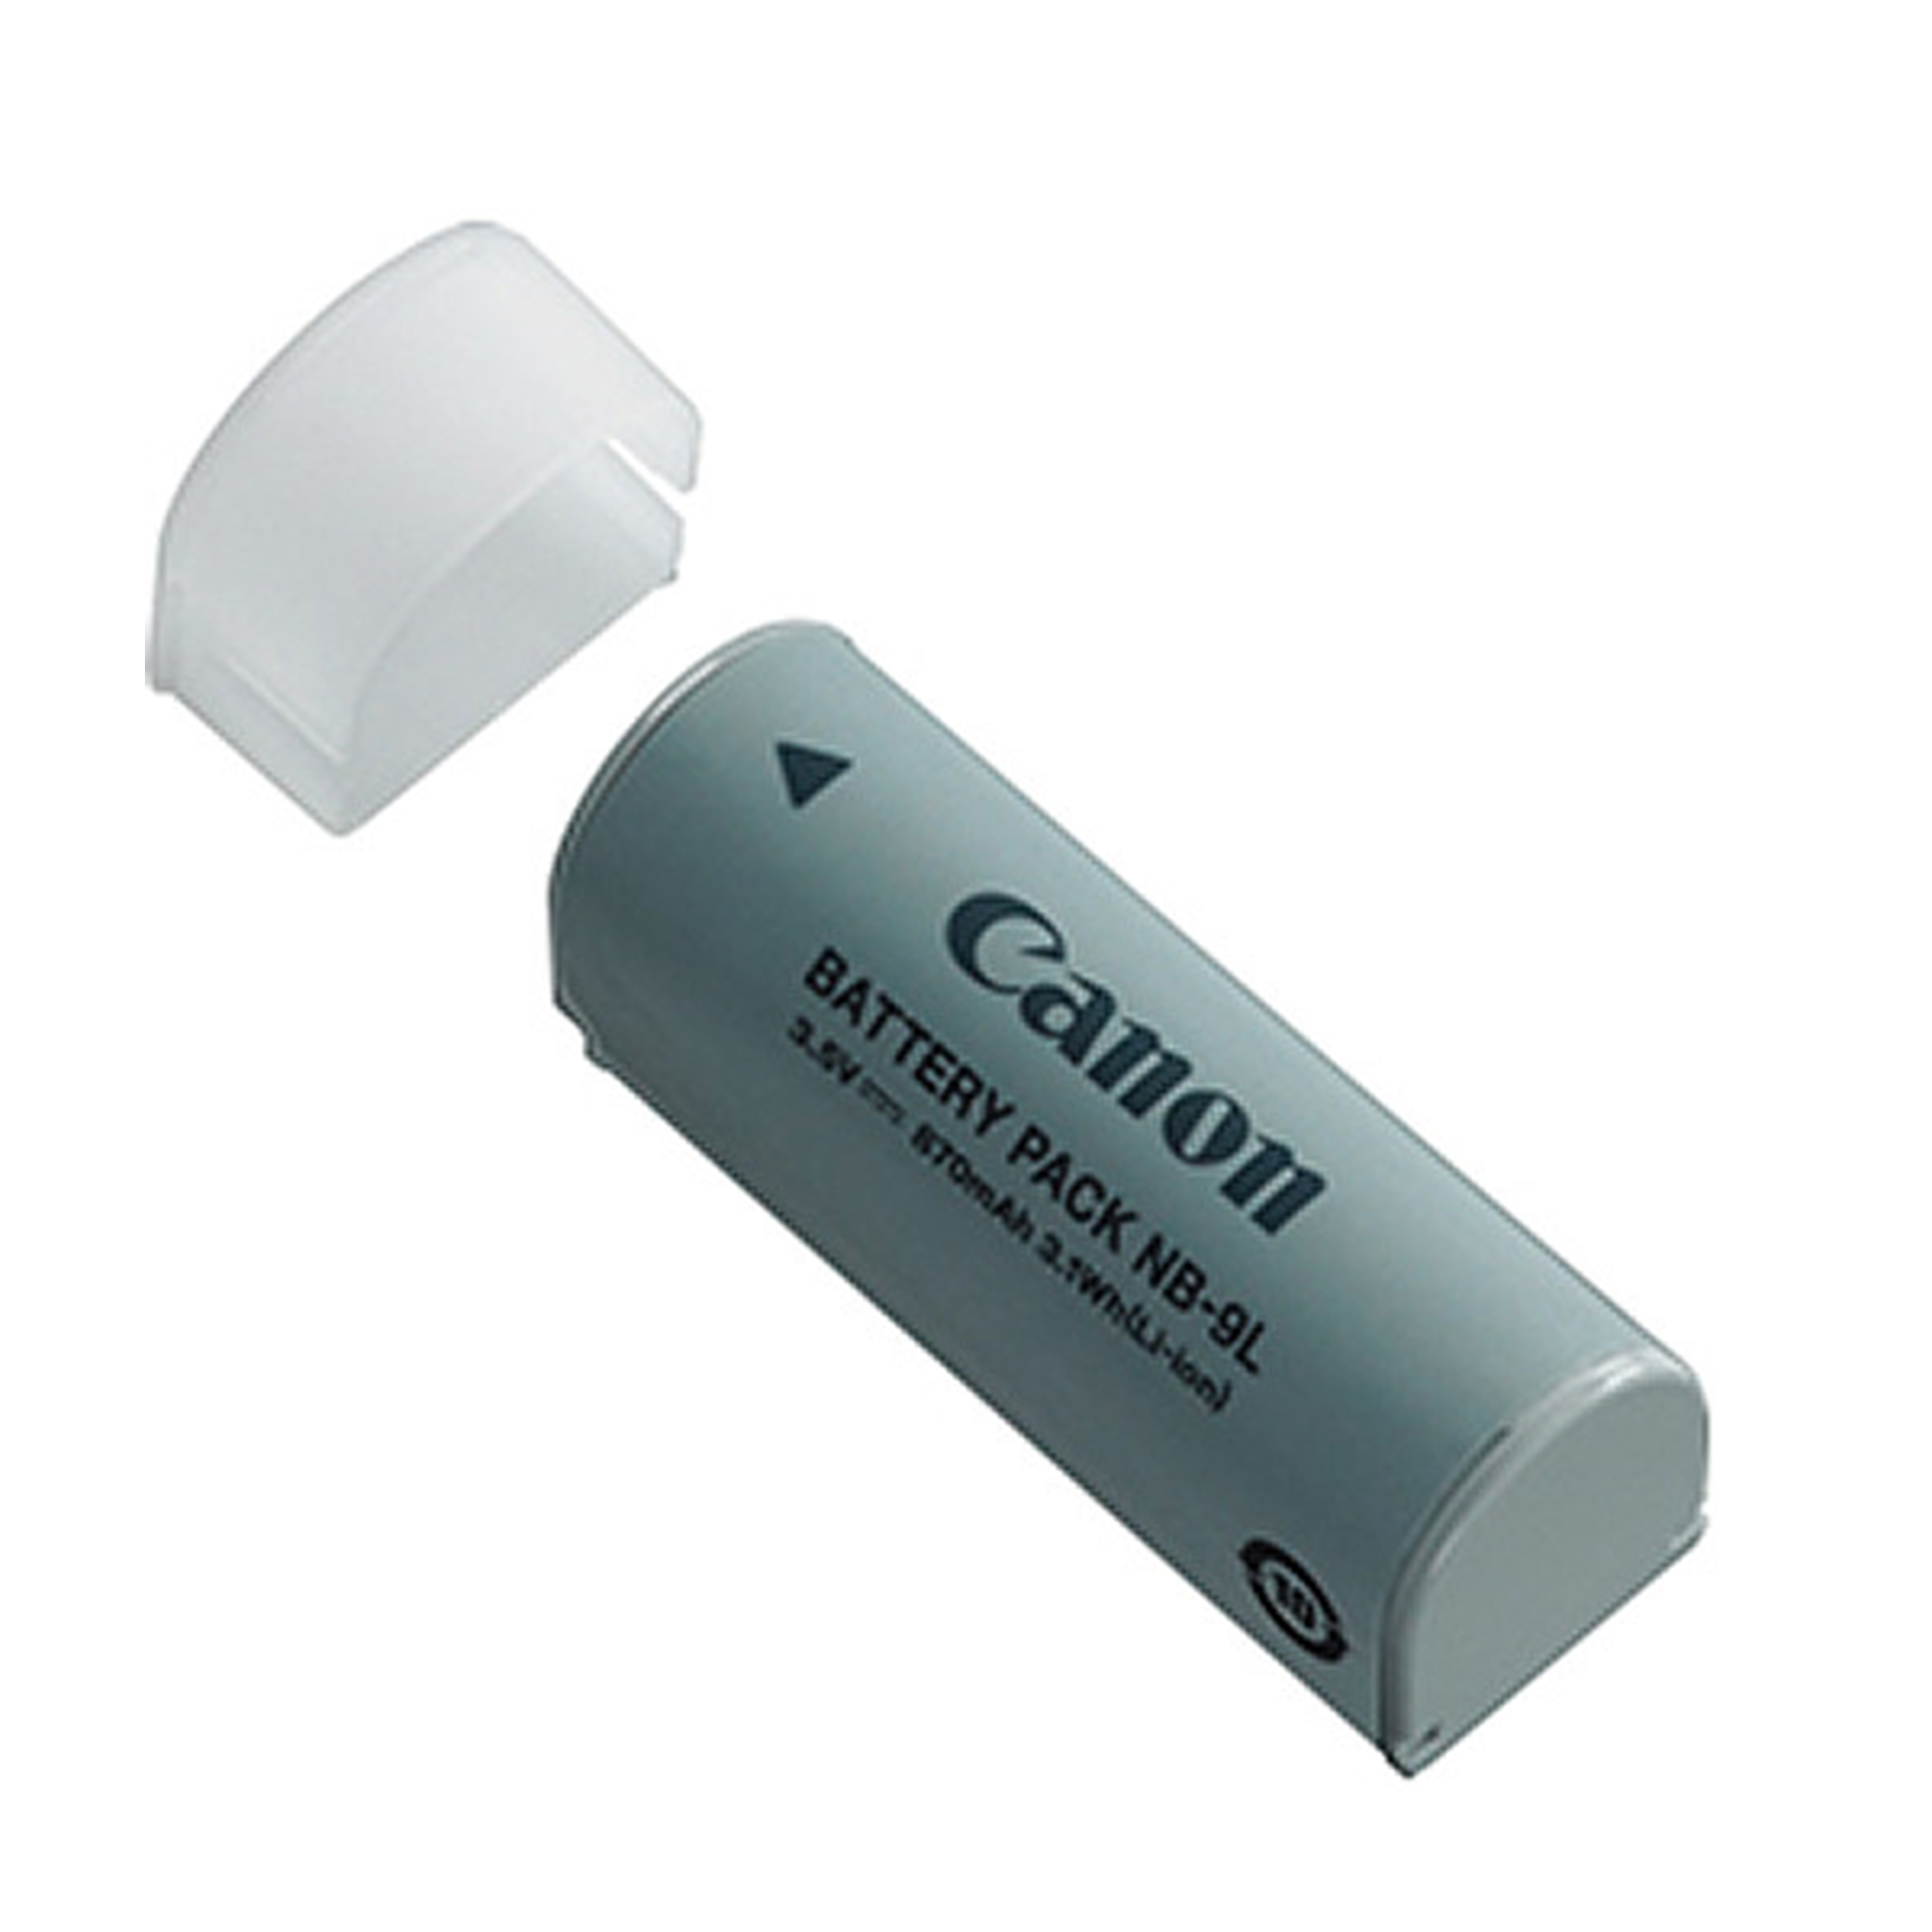 Canon NB-9L Lithium-Ion Battery Pack